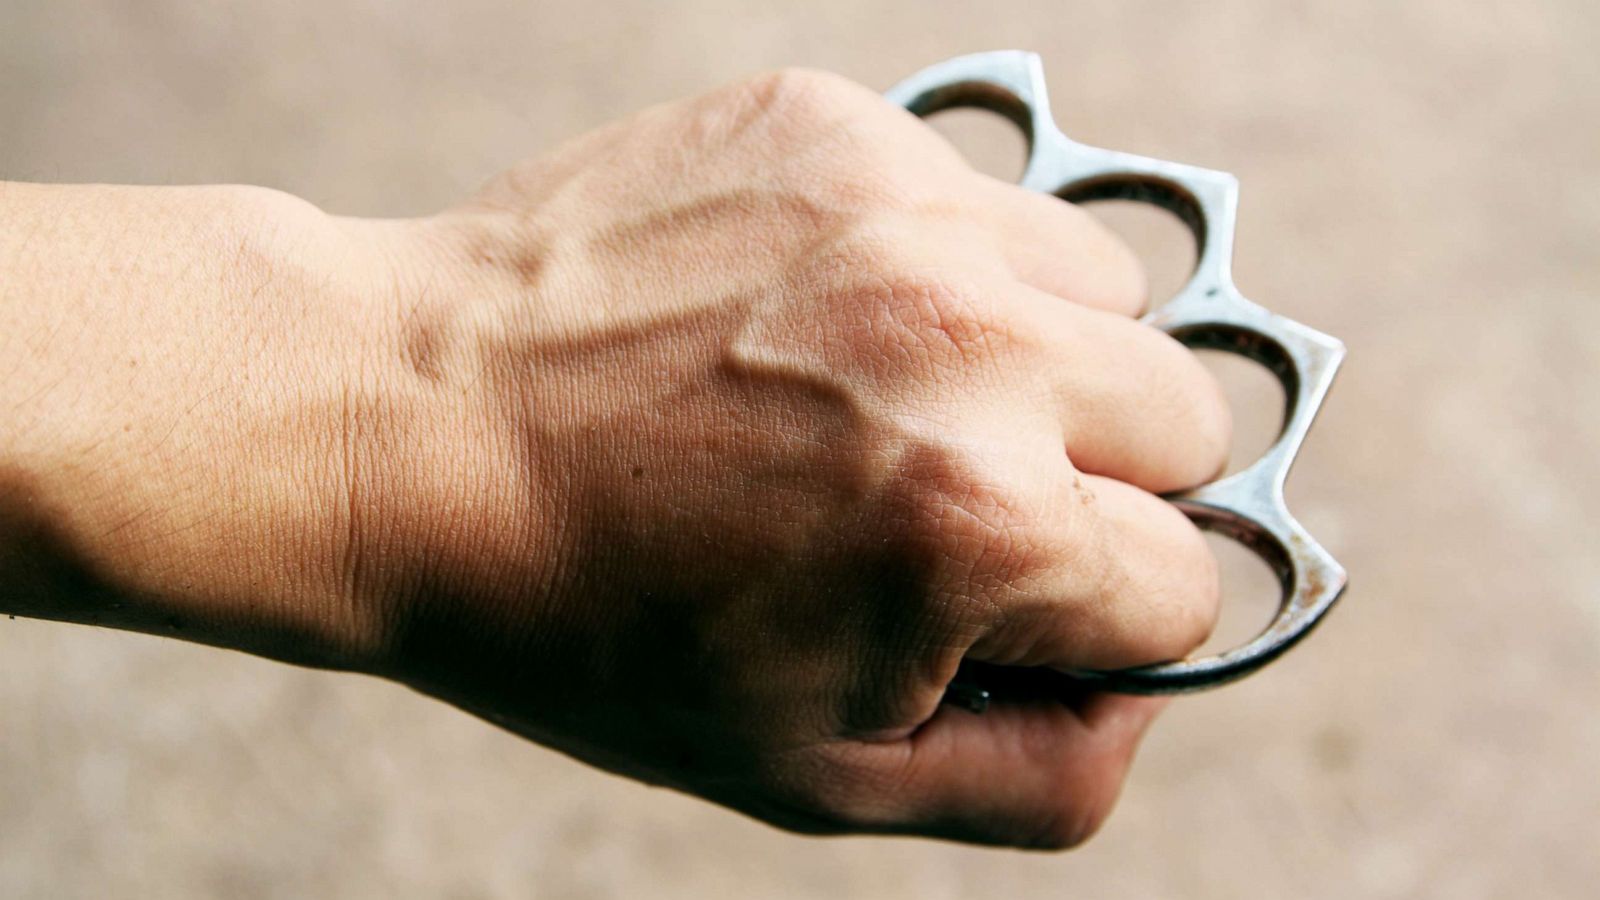 It's now legal to carry brass knuckles in Texas for 'self-defense